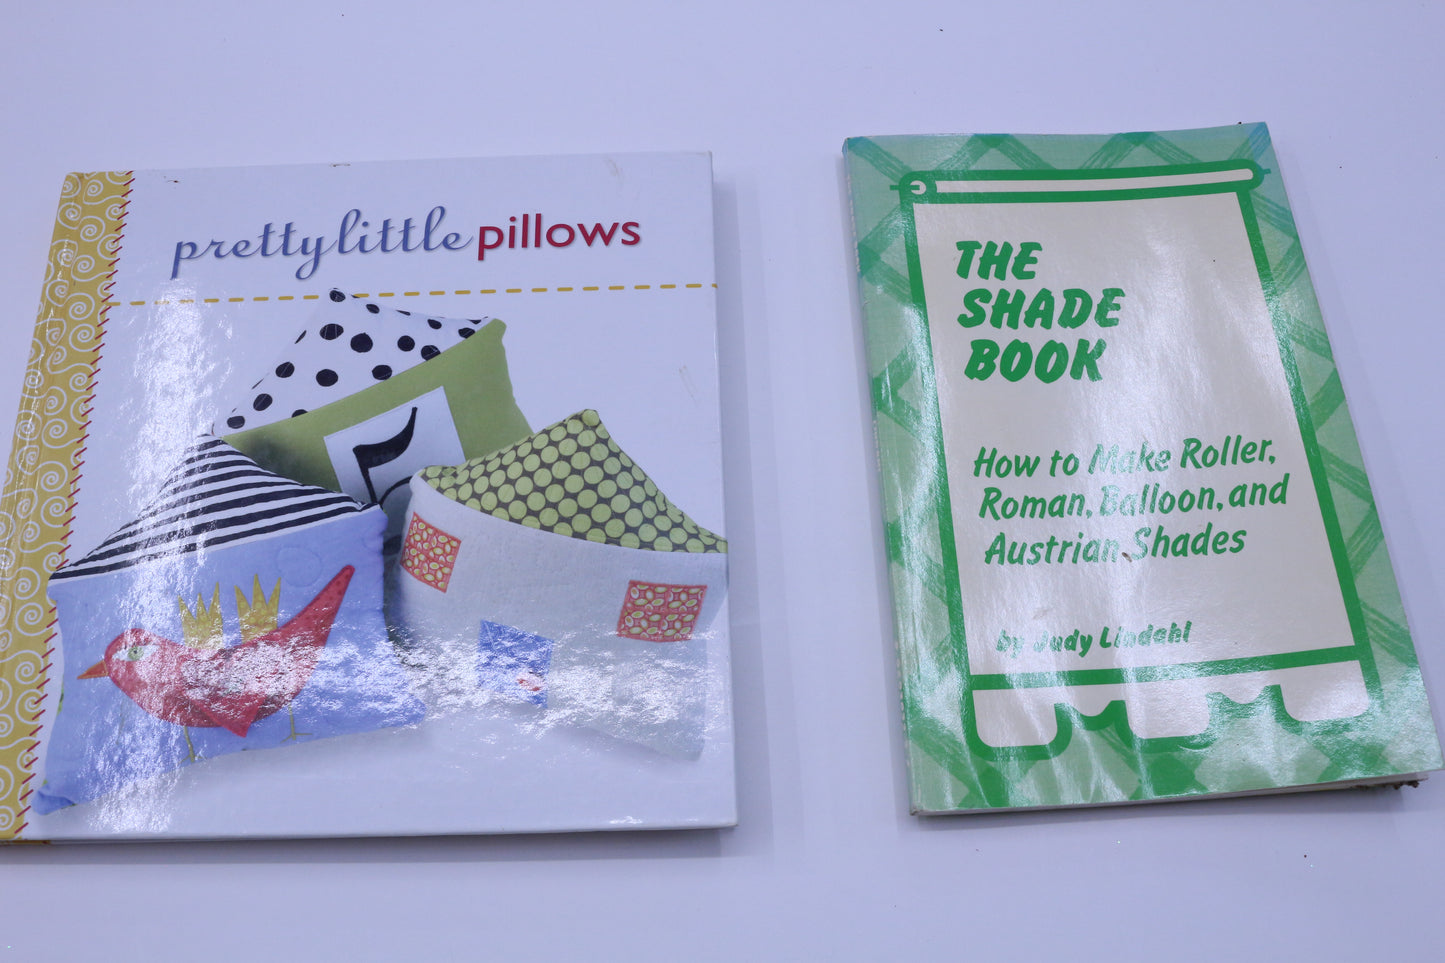 Pretty Little Pillows or The Shade Book